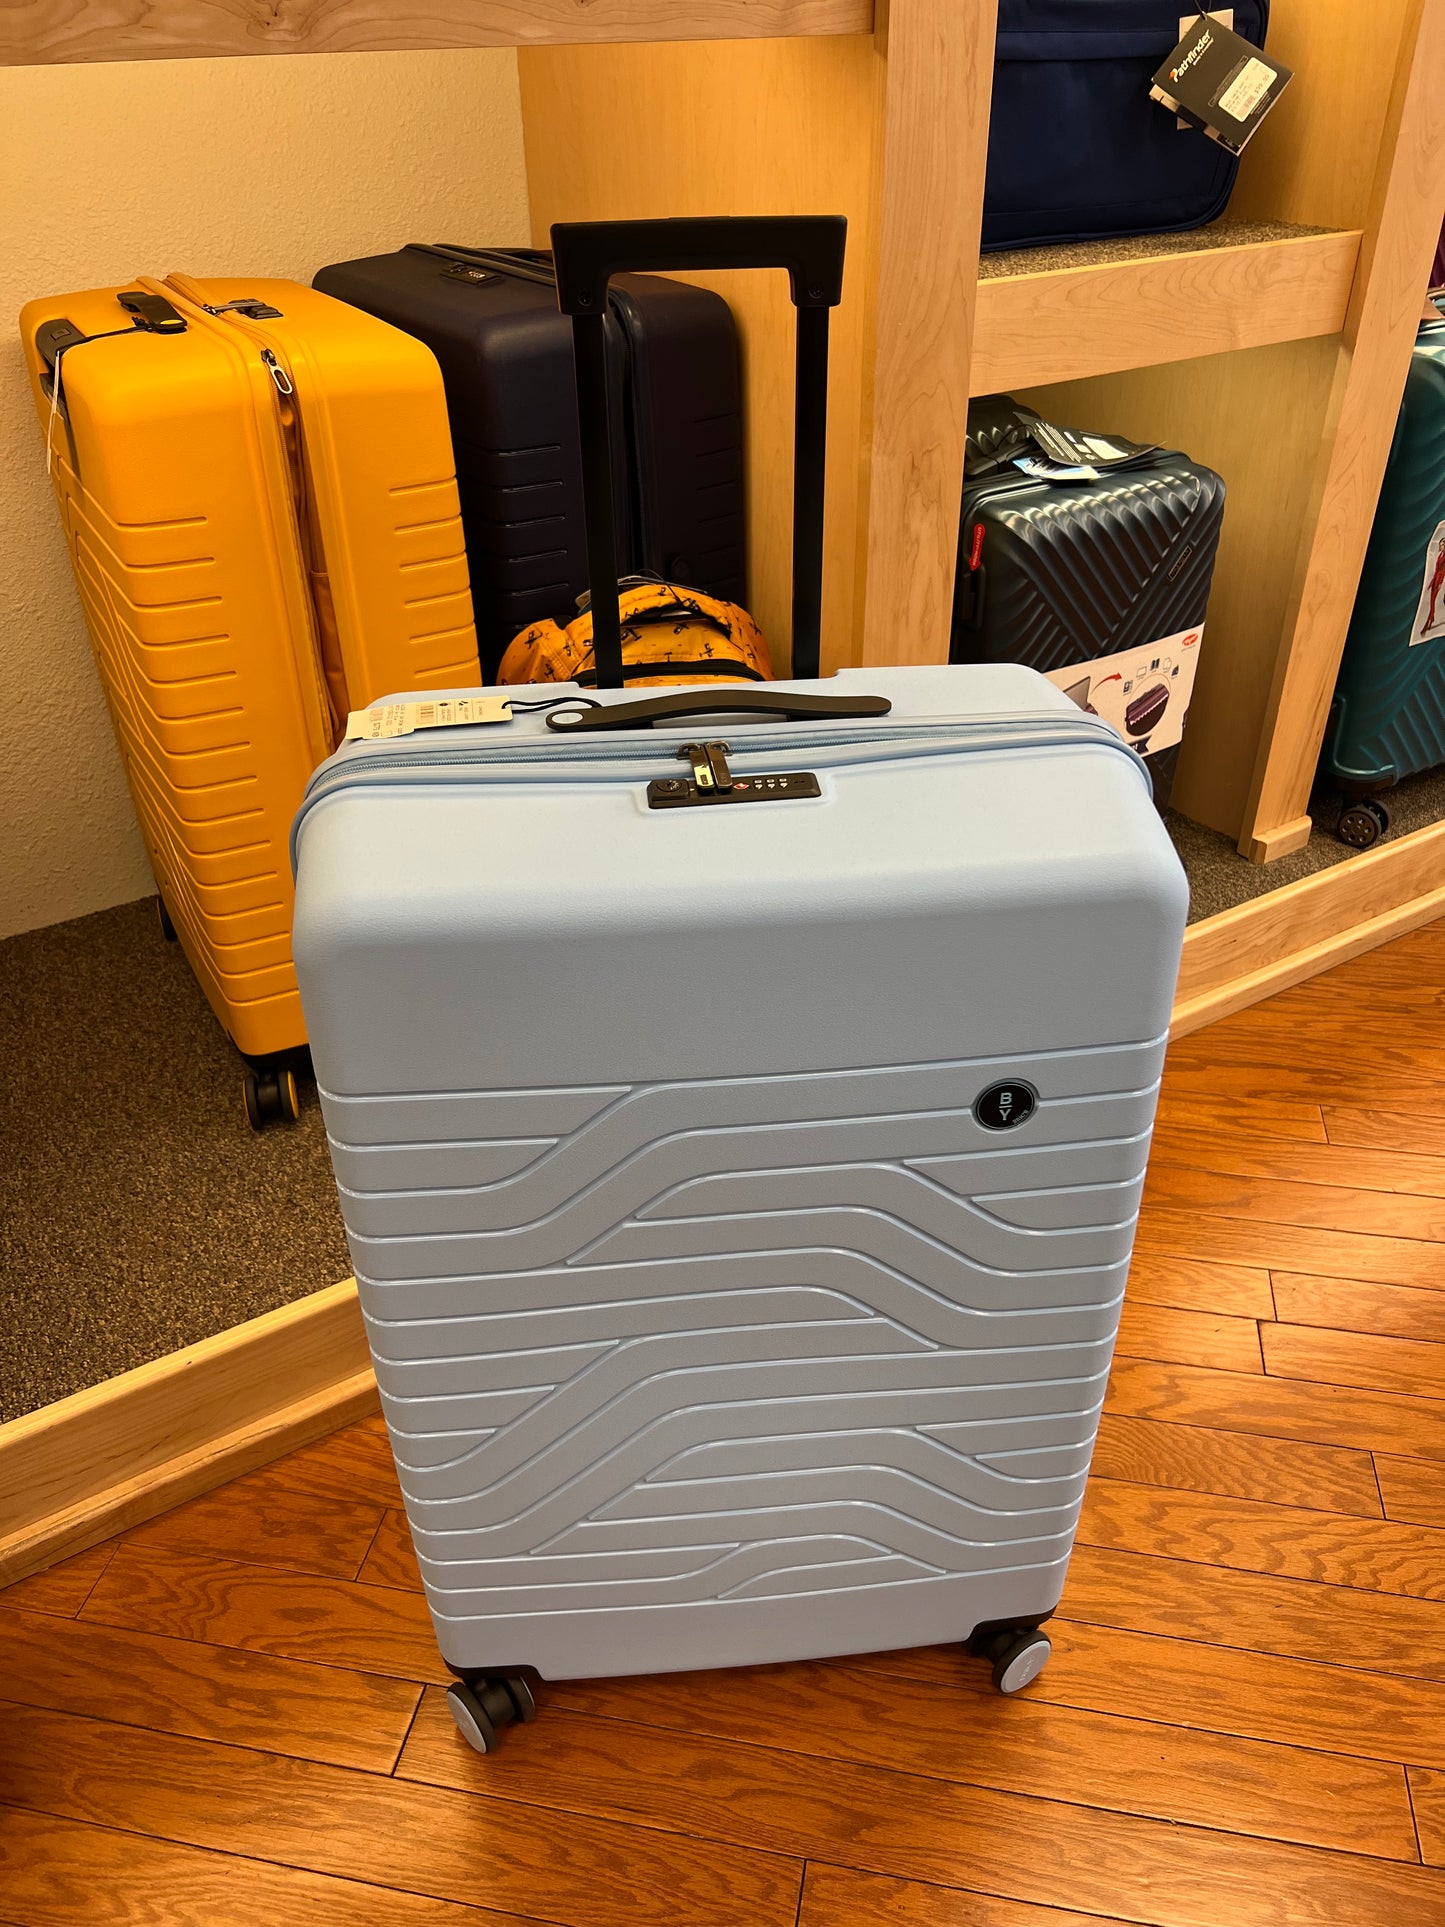 Bric's Ulisse 30" Checked Hardsided Expandable Spinner